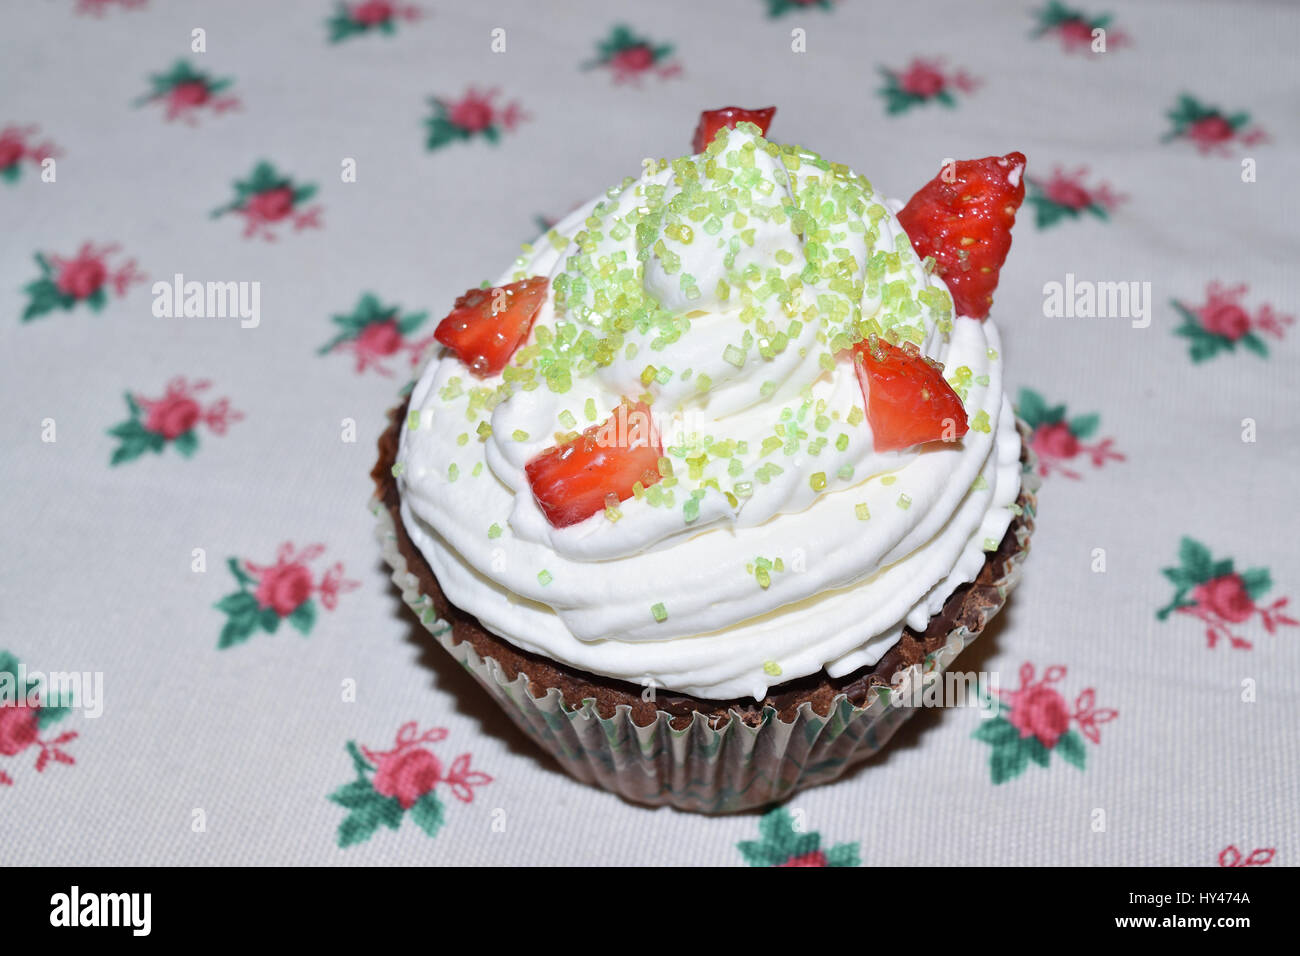 cup cakes with cream and various colorful decorations Stock Photo